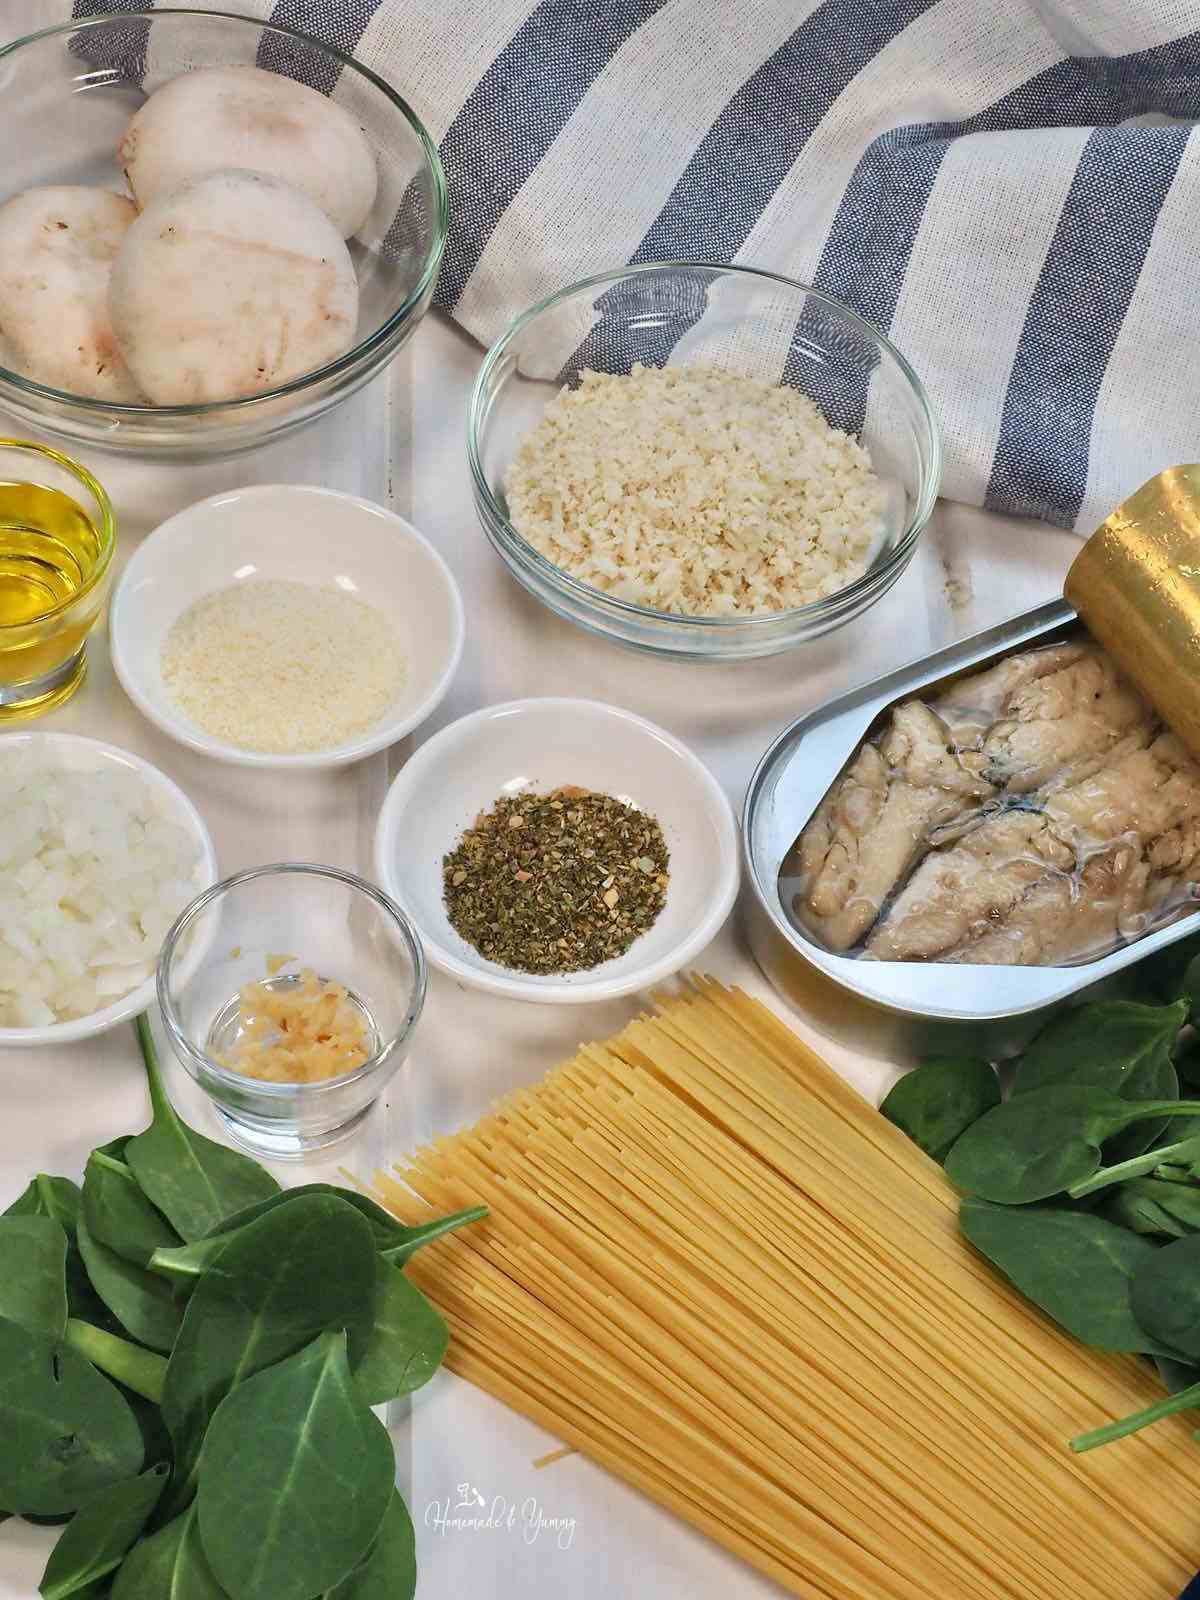 Ingredients to make spaghetti with sardines, mushrooms and spinach.